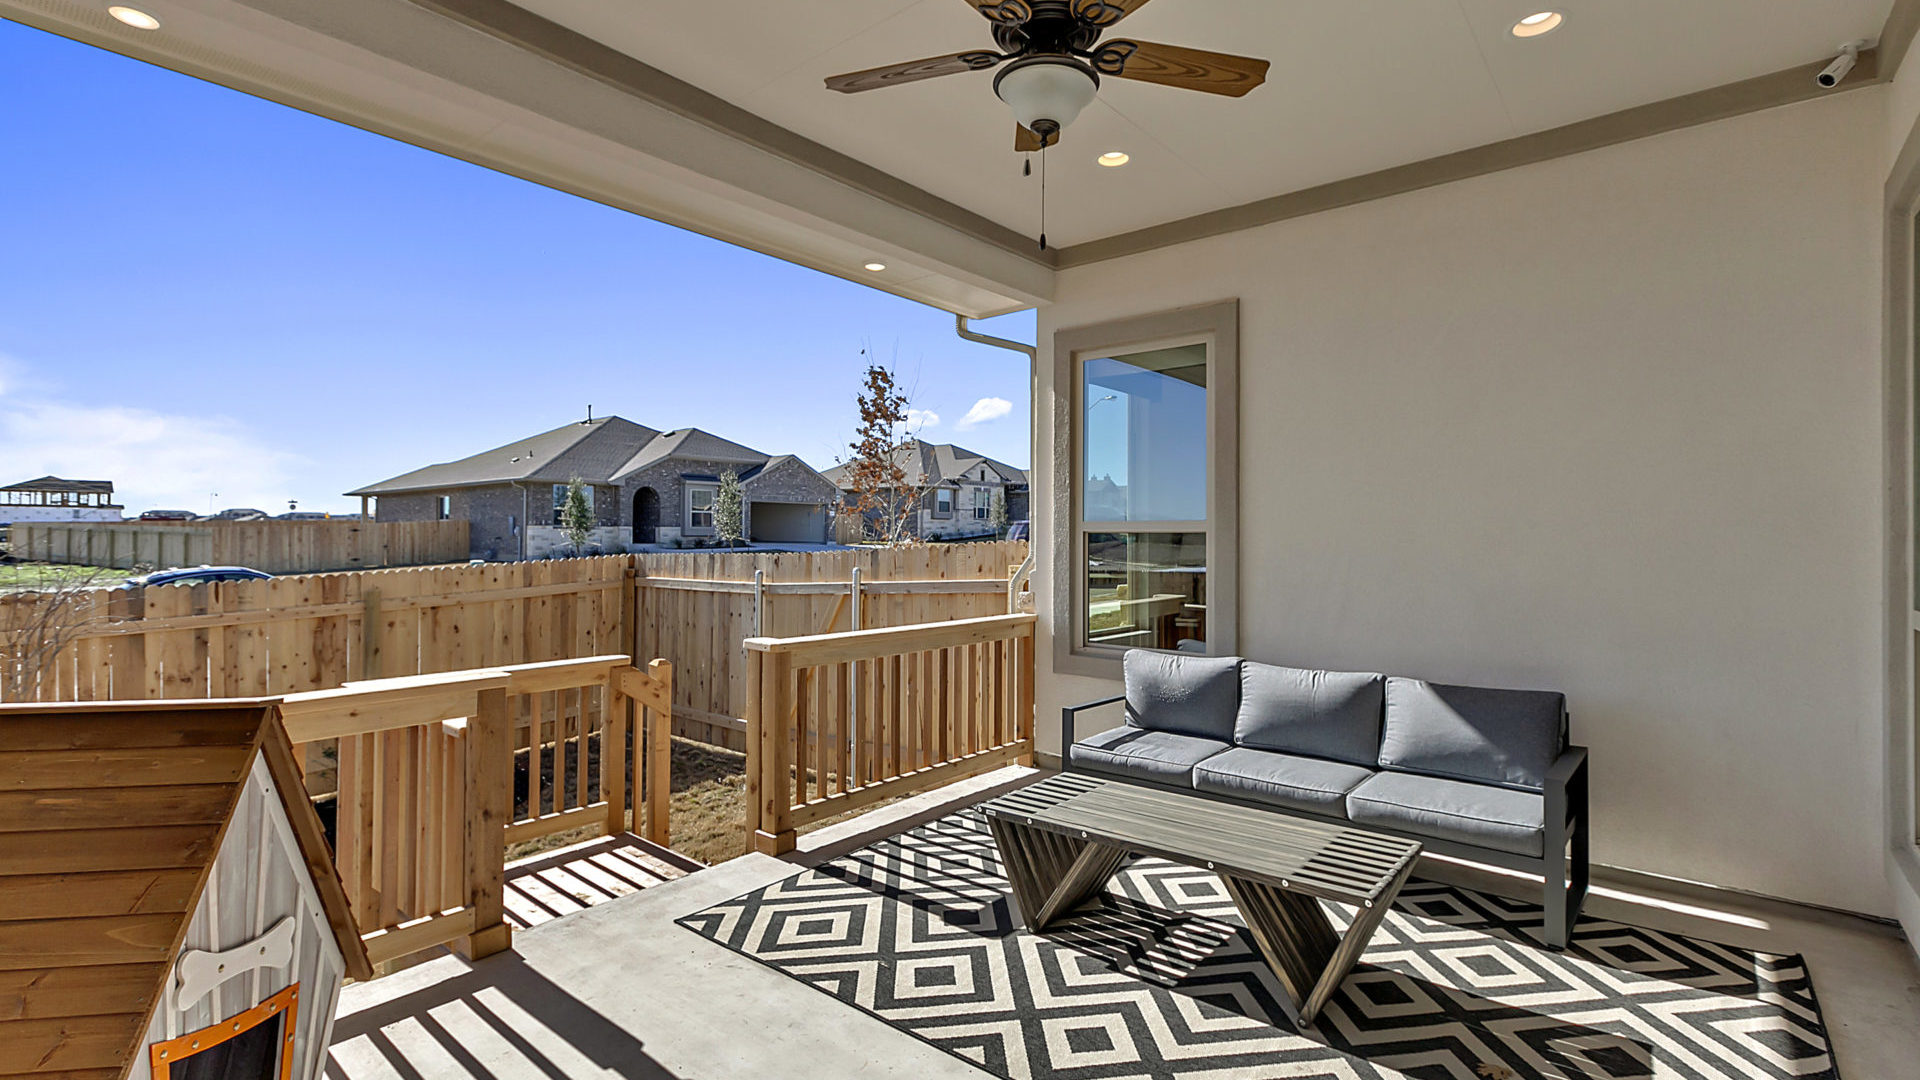 Star Ranch Community Model Home Covered Patio